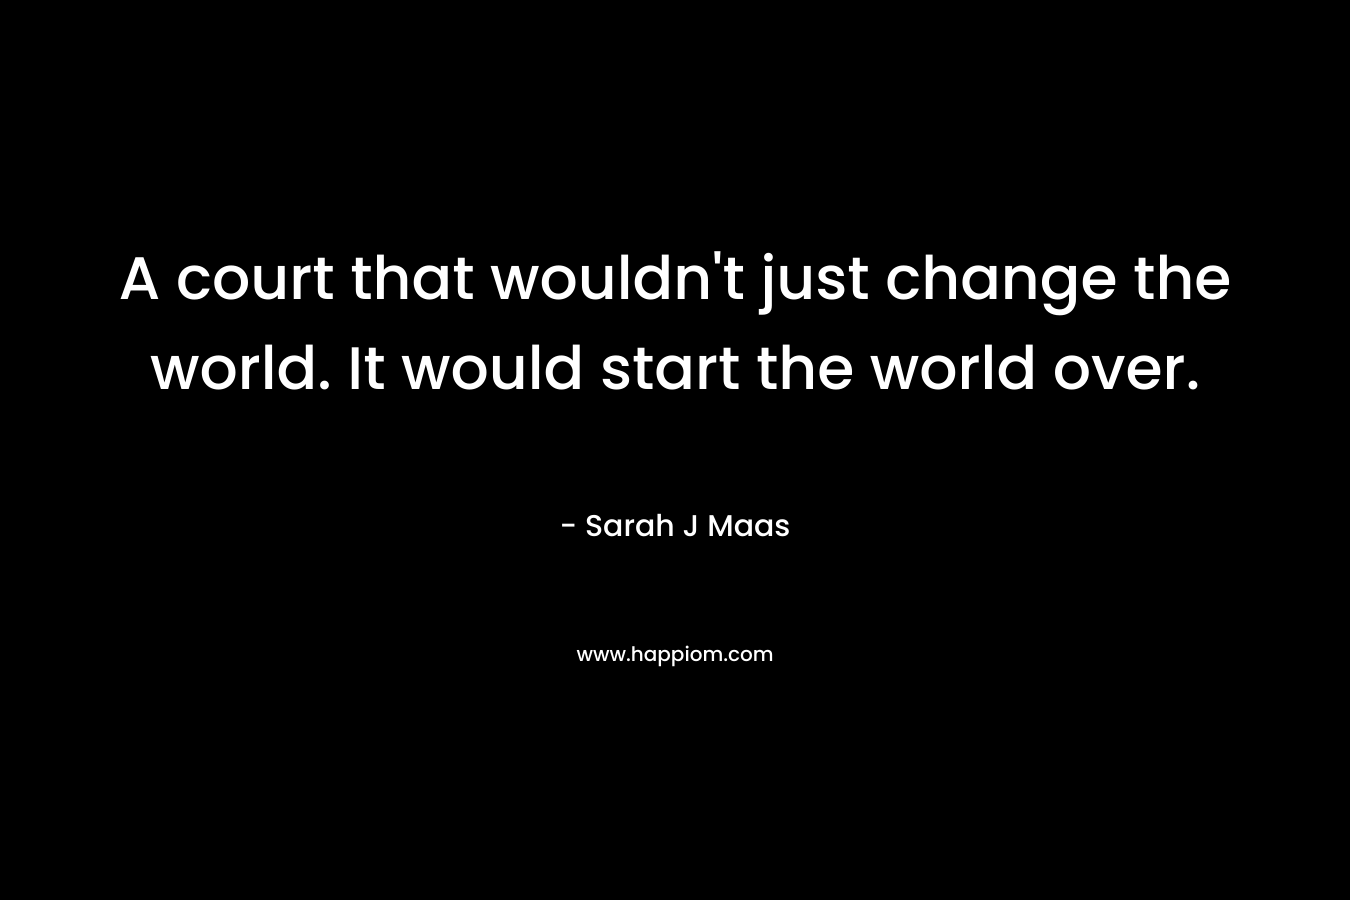 A court that wouldn't just change the world. It would start the world over.